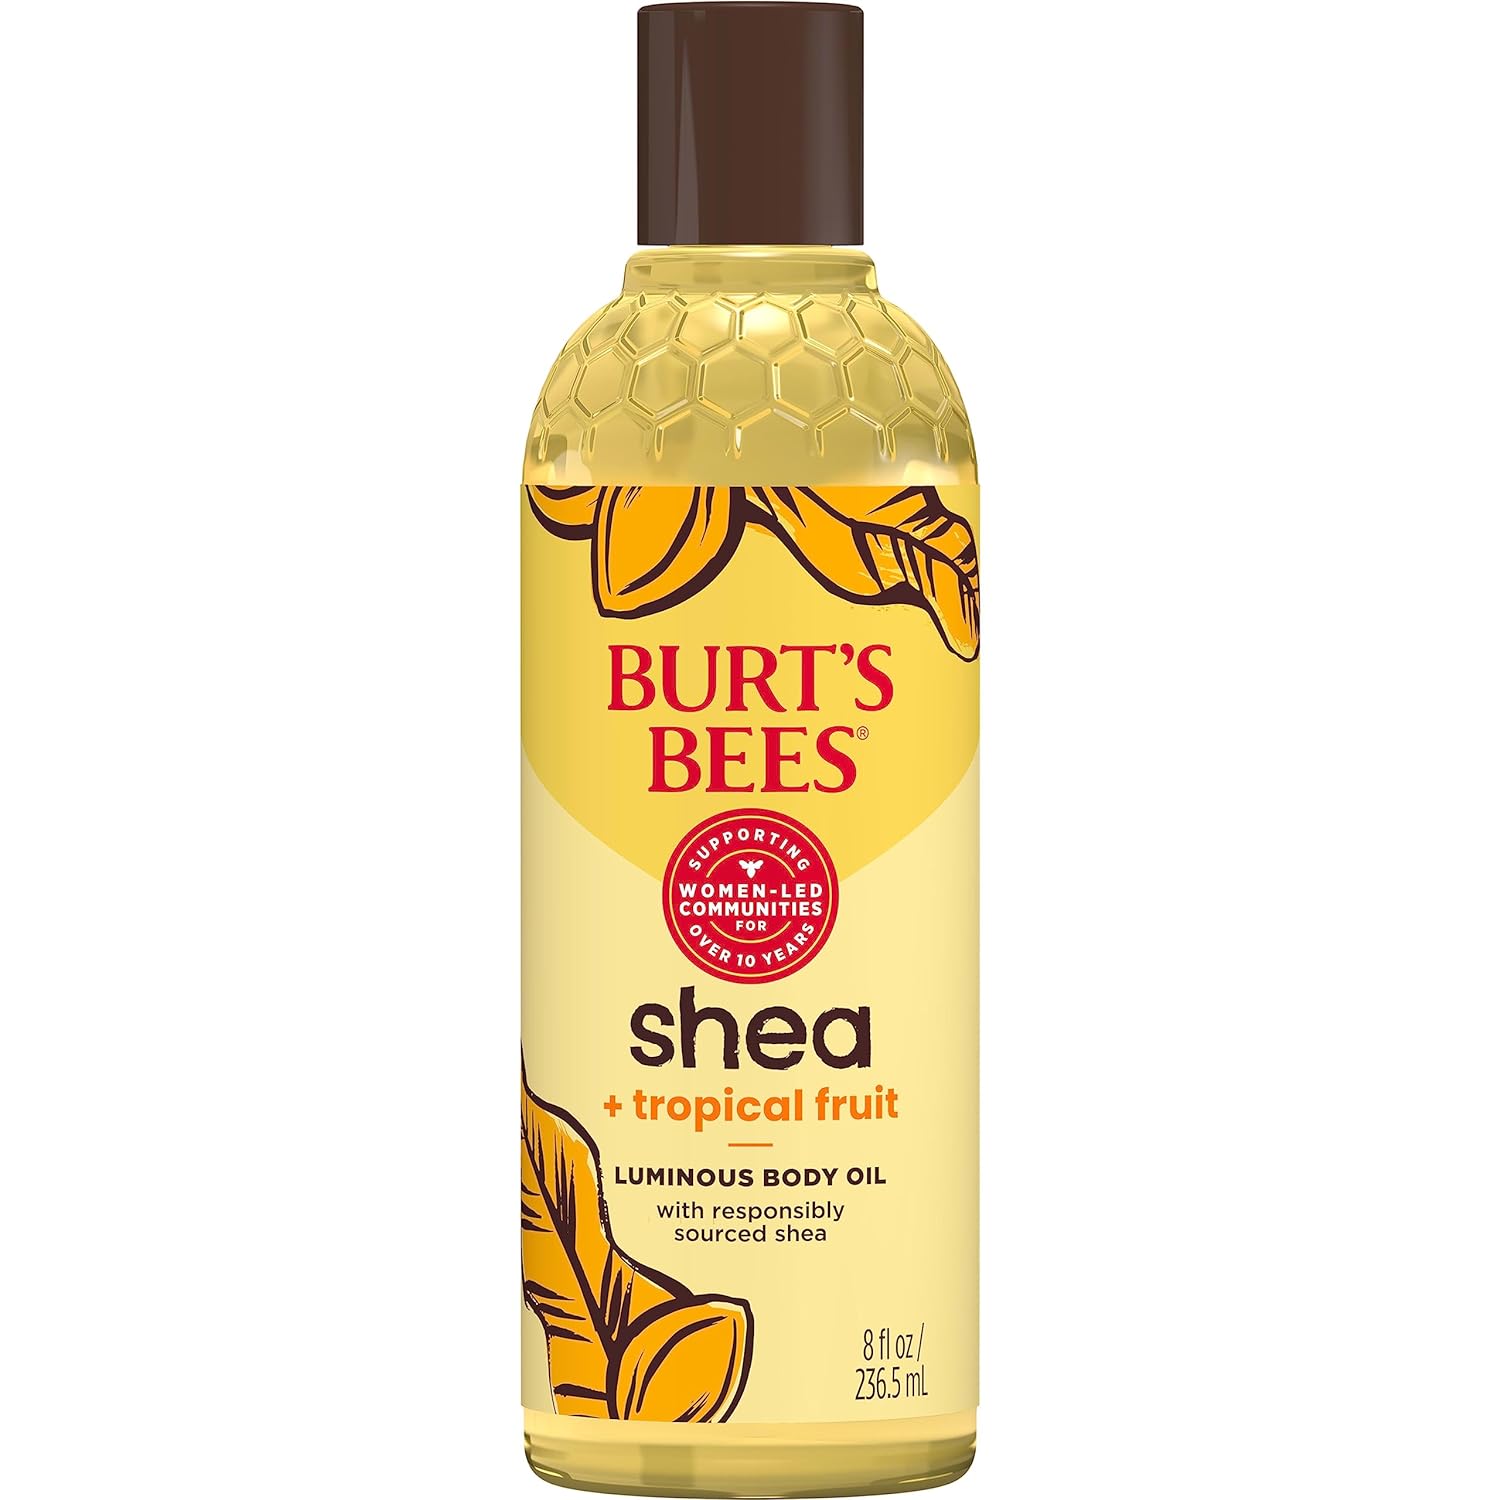 Burt's Bees Shea + Tropical Fruit Luminous Body Oil, Mothers Day Gifts for Mom, Non-Greasy, Antioxidant Rich for Glowing Skin, Non-Irritating, Natural Origin Skin Care, 8 oz